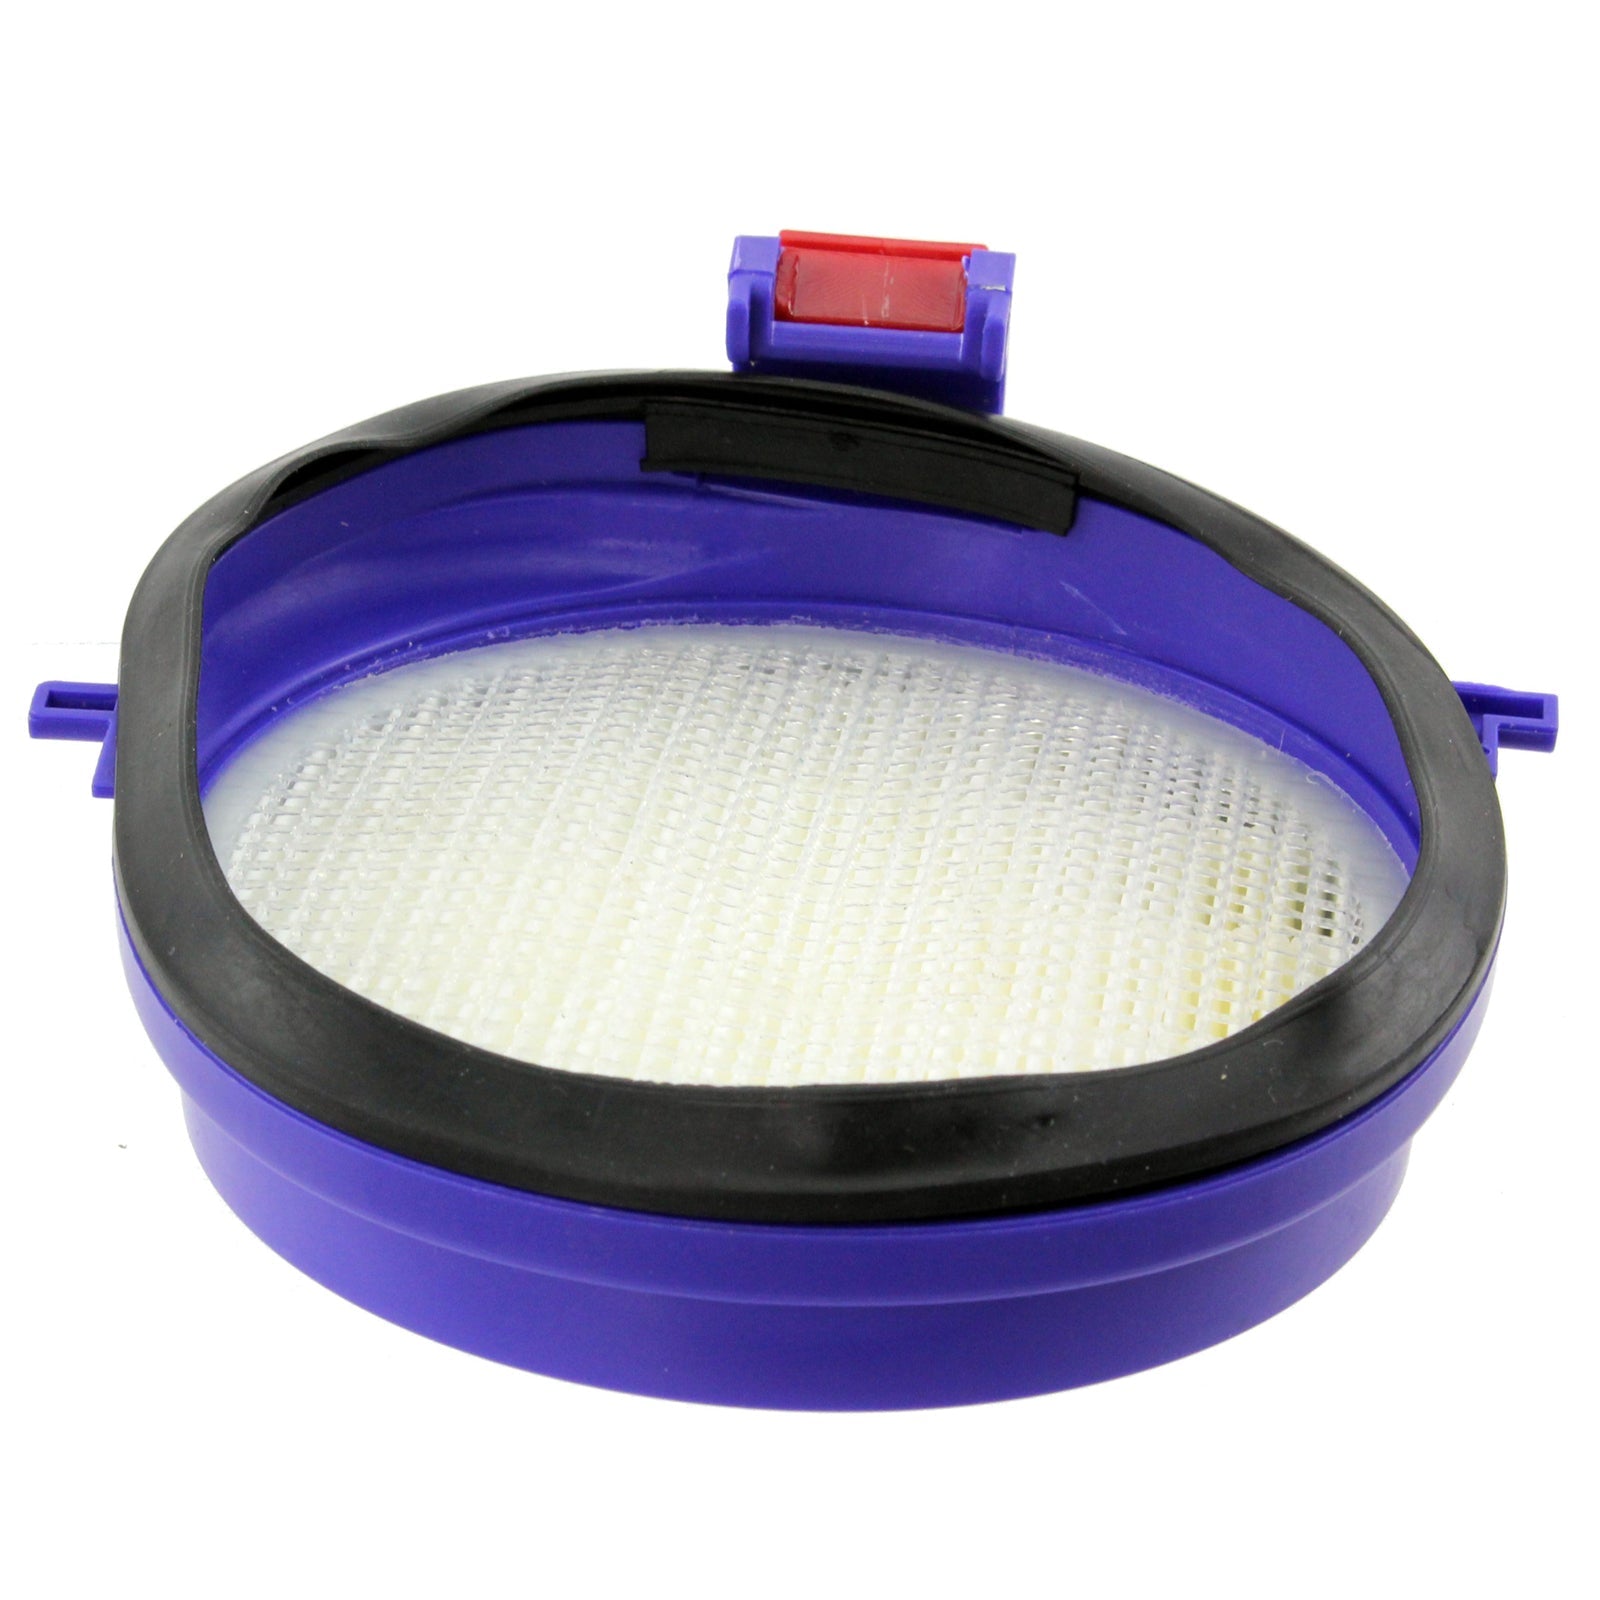 Brushroll and Filter Kit DC24 DC24i compatible with Dyson Vacuum Cleaner Washable Pre & Post Motor HEPA